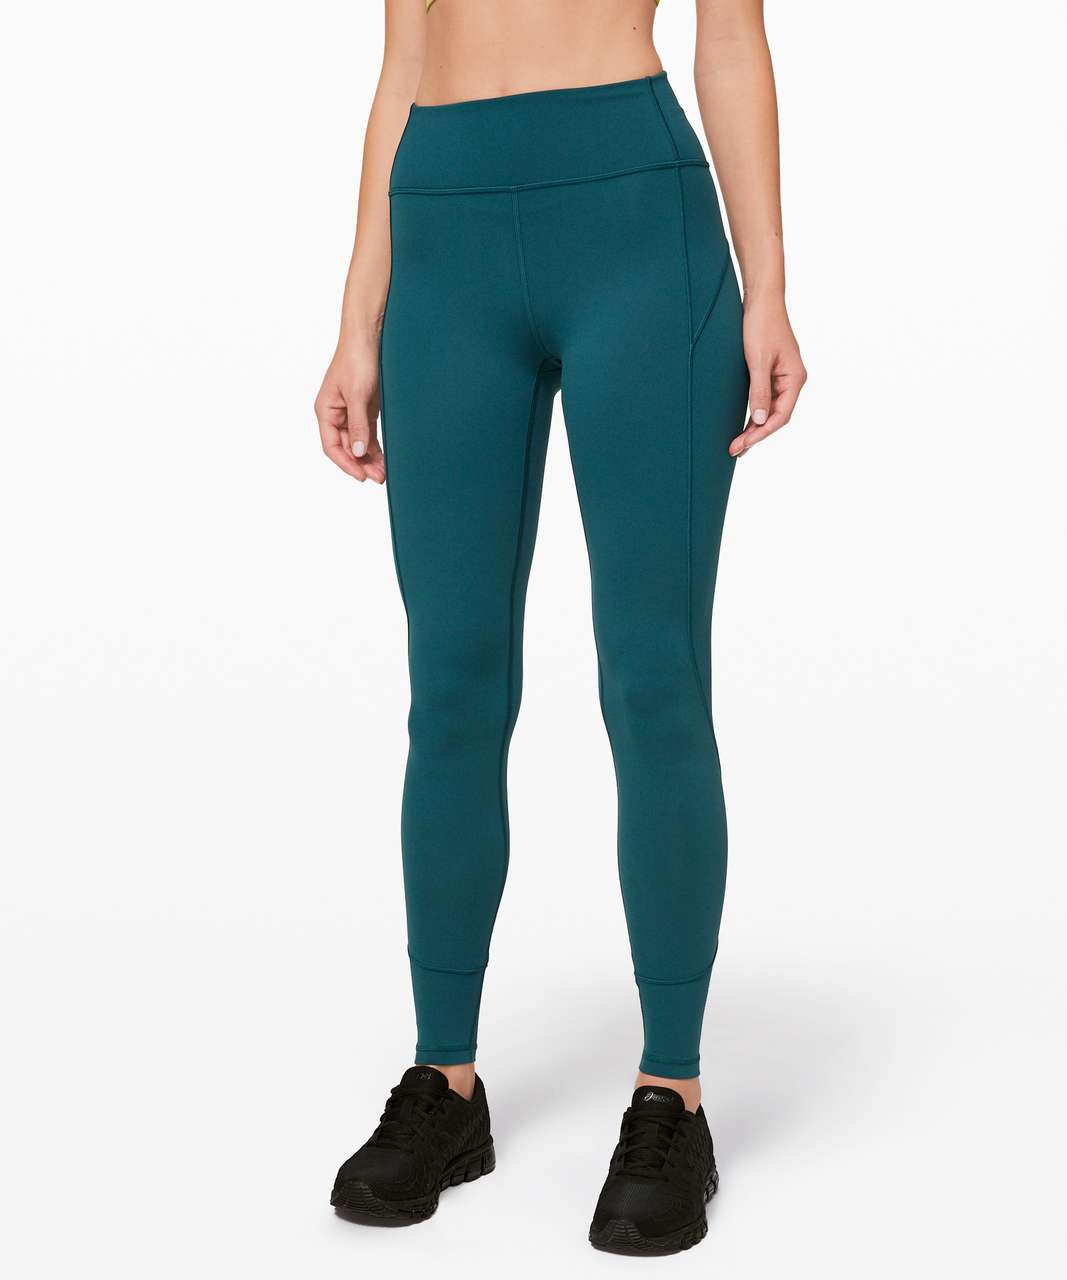 Lululemon Speed Up Tight *28 • Power Luxtreme Variegated Knit